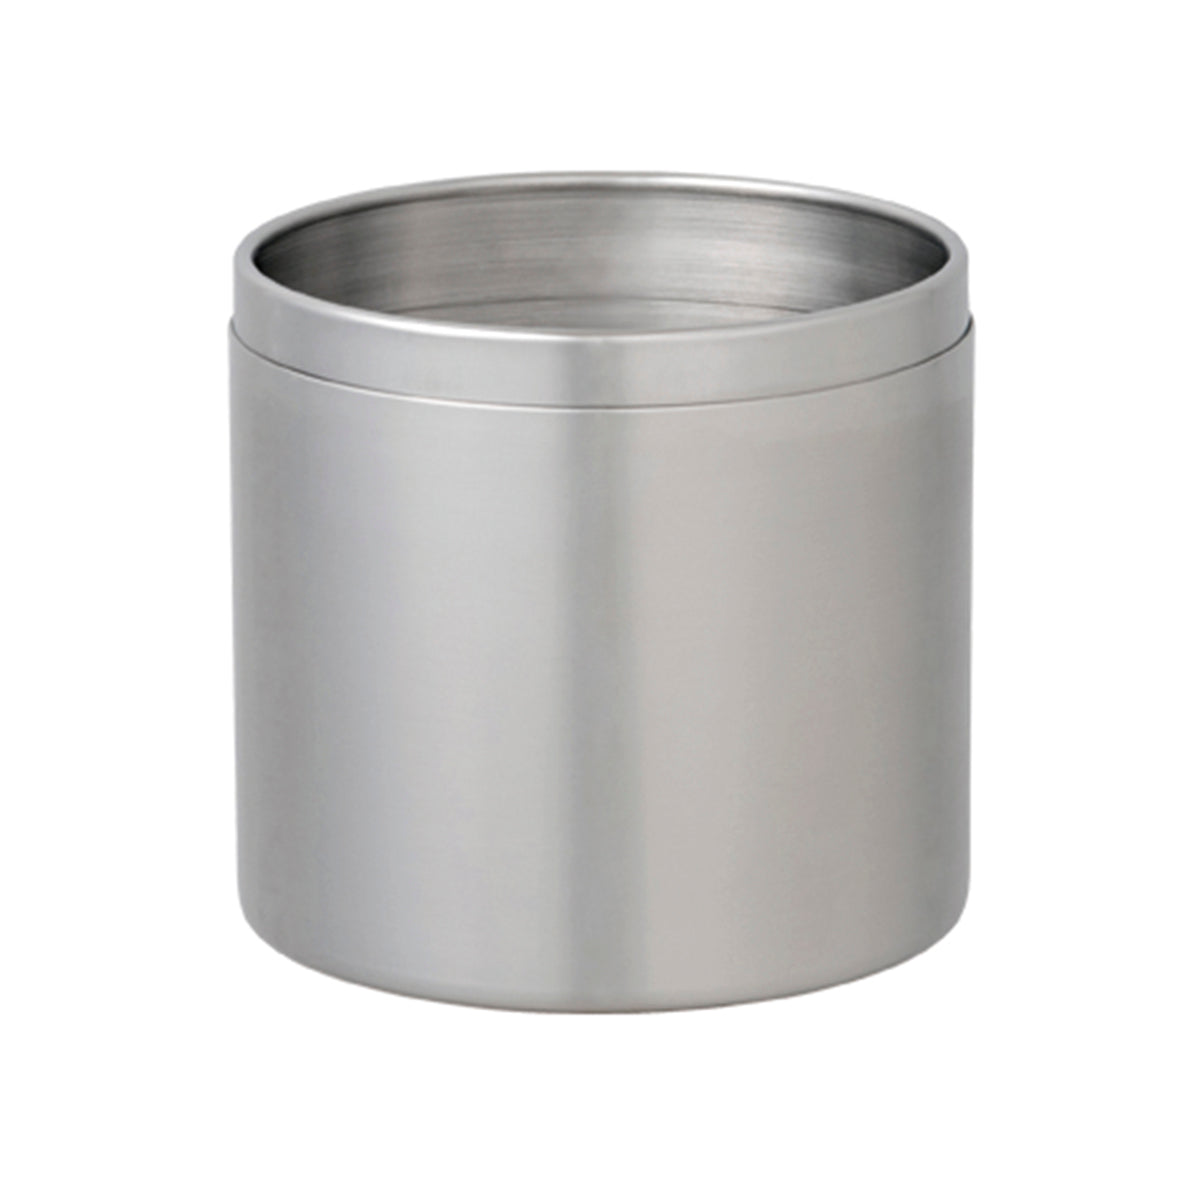 https://yamamotoyama.com/cdn/shop/products/tpmym0017-stainless-steel-tea-canister_ee6fa2d9-be0f-4221-a0cd-73590bc05328_1200x.jpg?v=1629751148